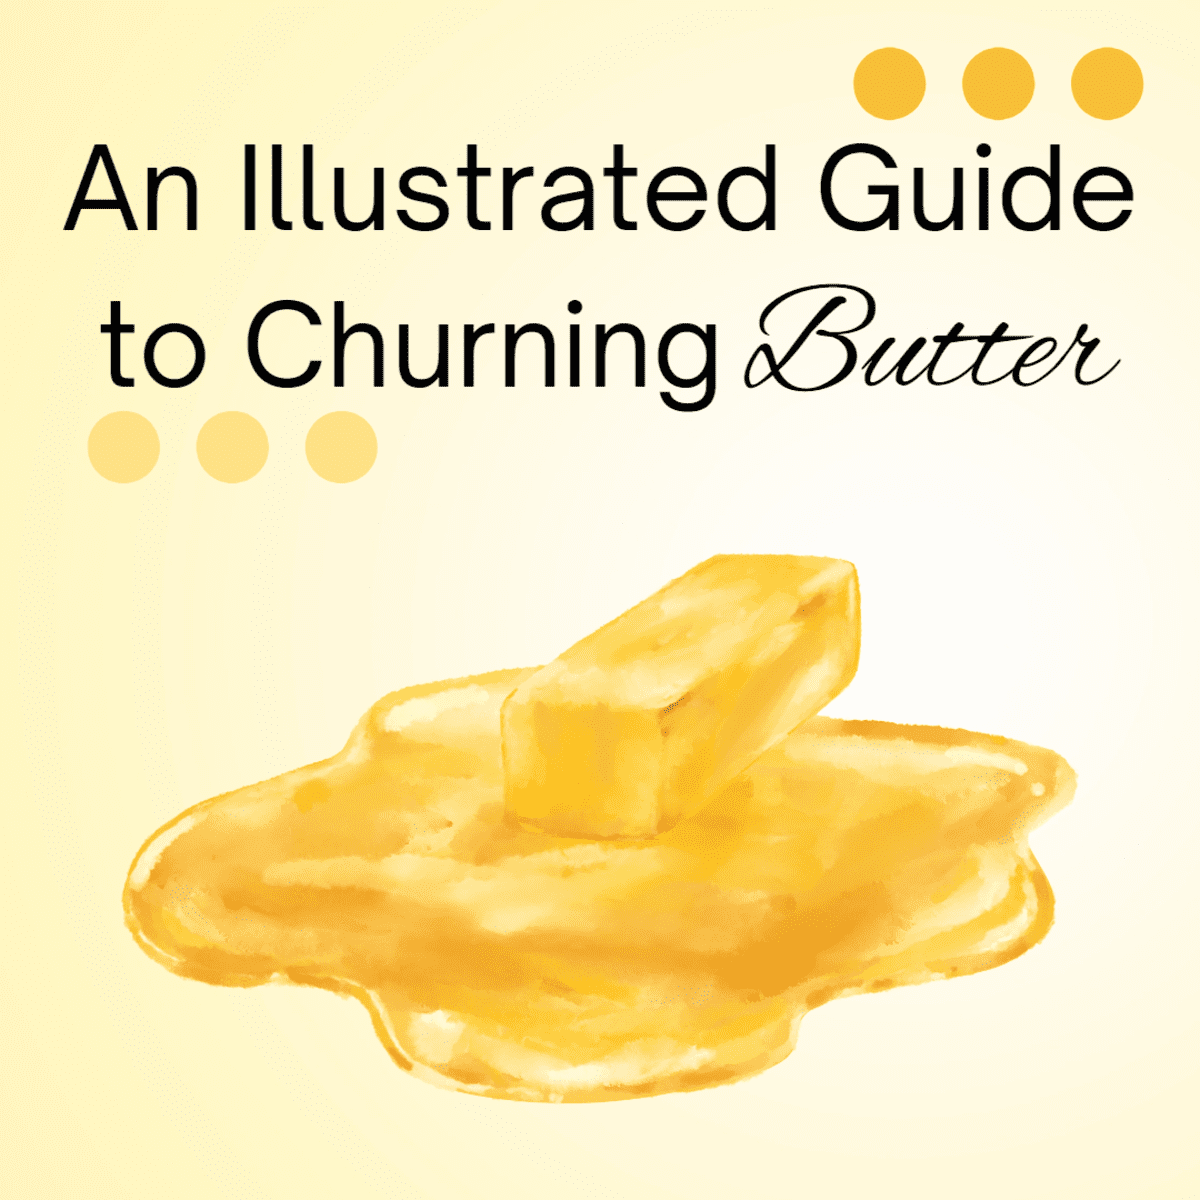 Breakfast Details: How To Make Molded Butter Pats